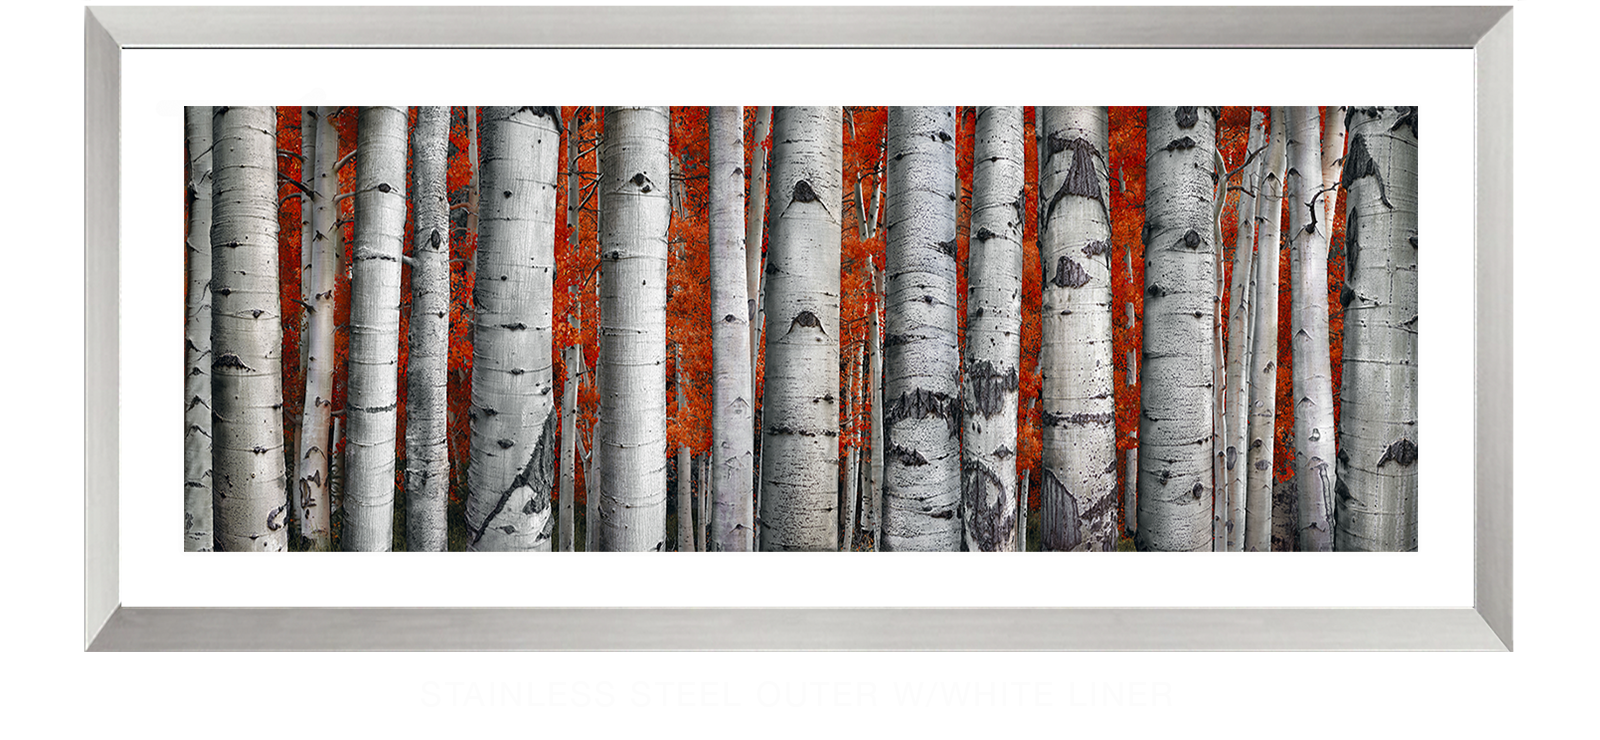 3ASPEN Stainless Steel Outer w_Wht Liner T